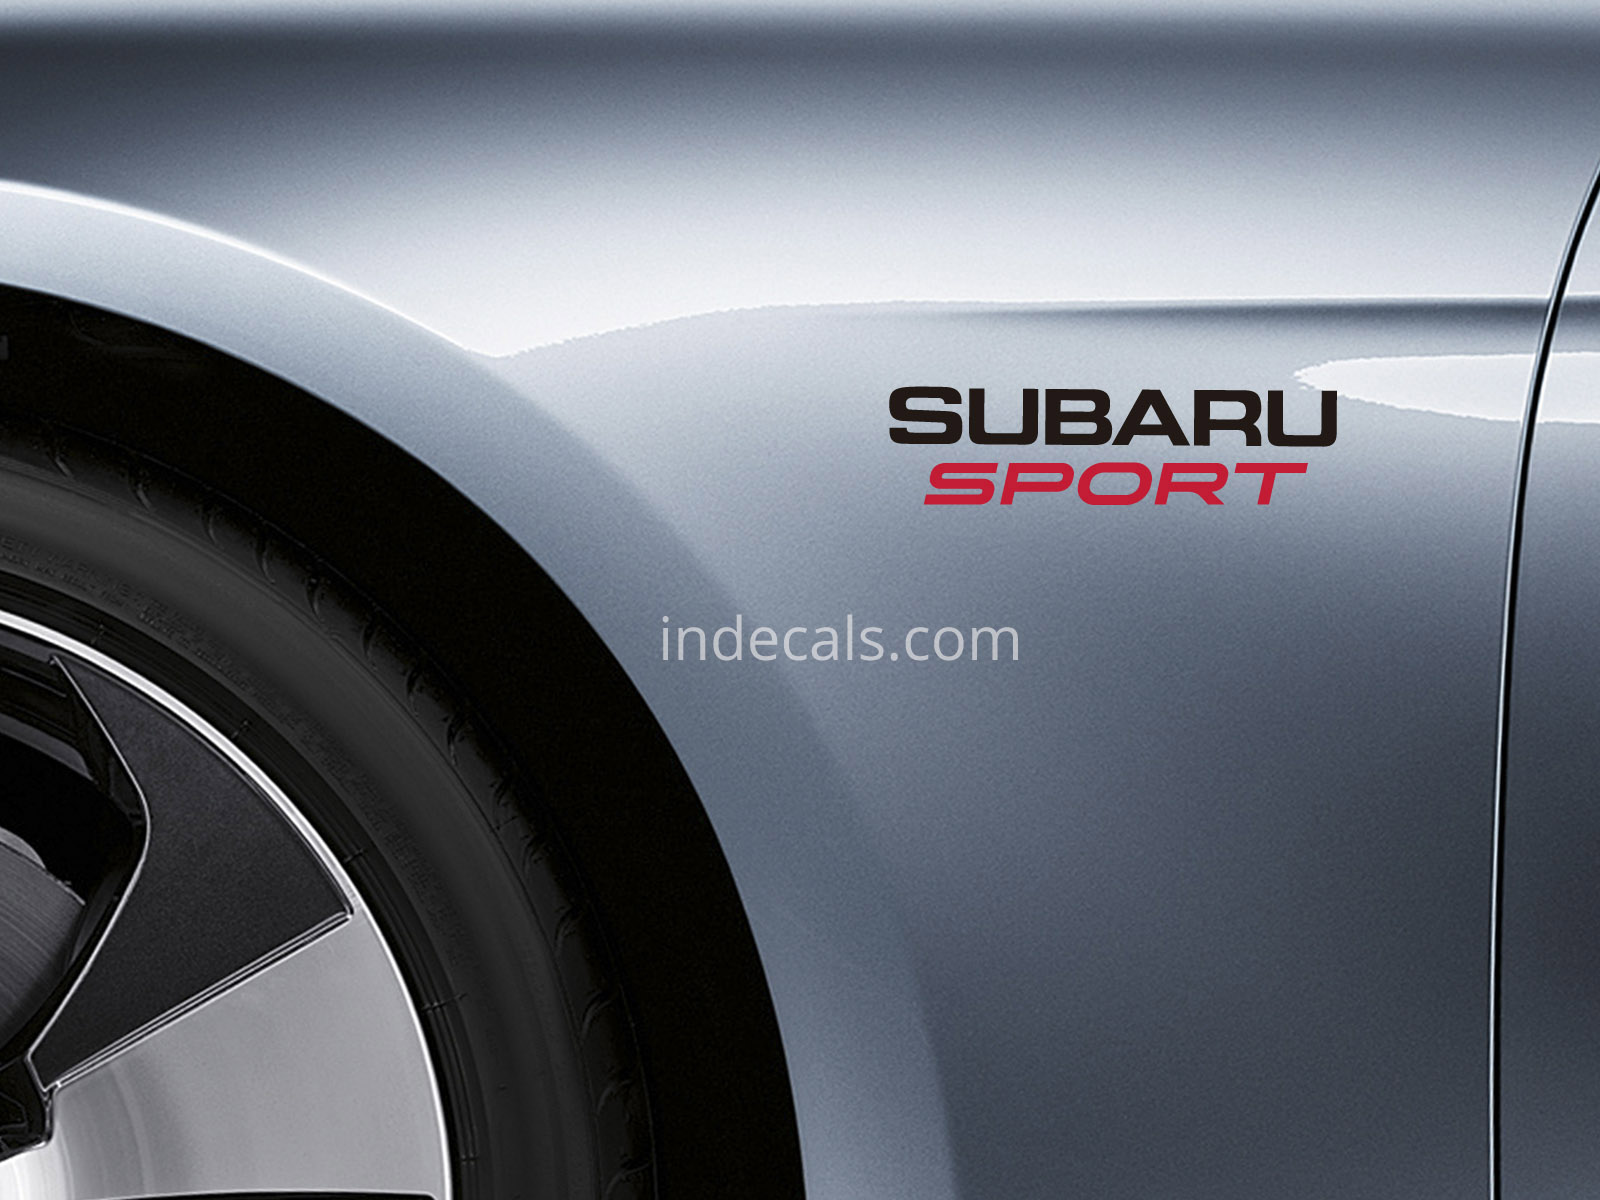 2 x Subaru Sports stickers for Wings - Black & Red